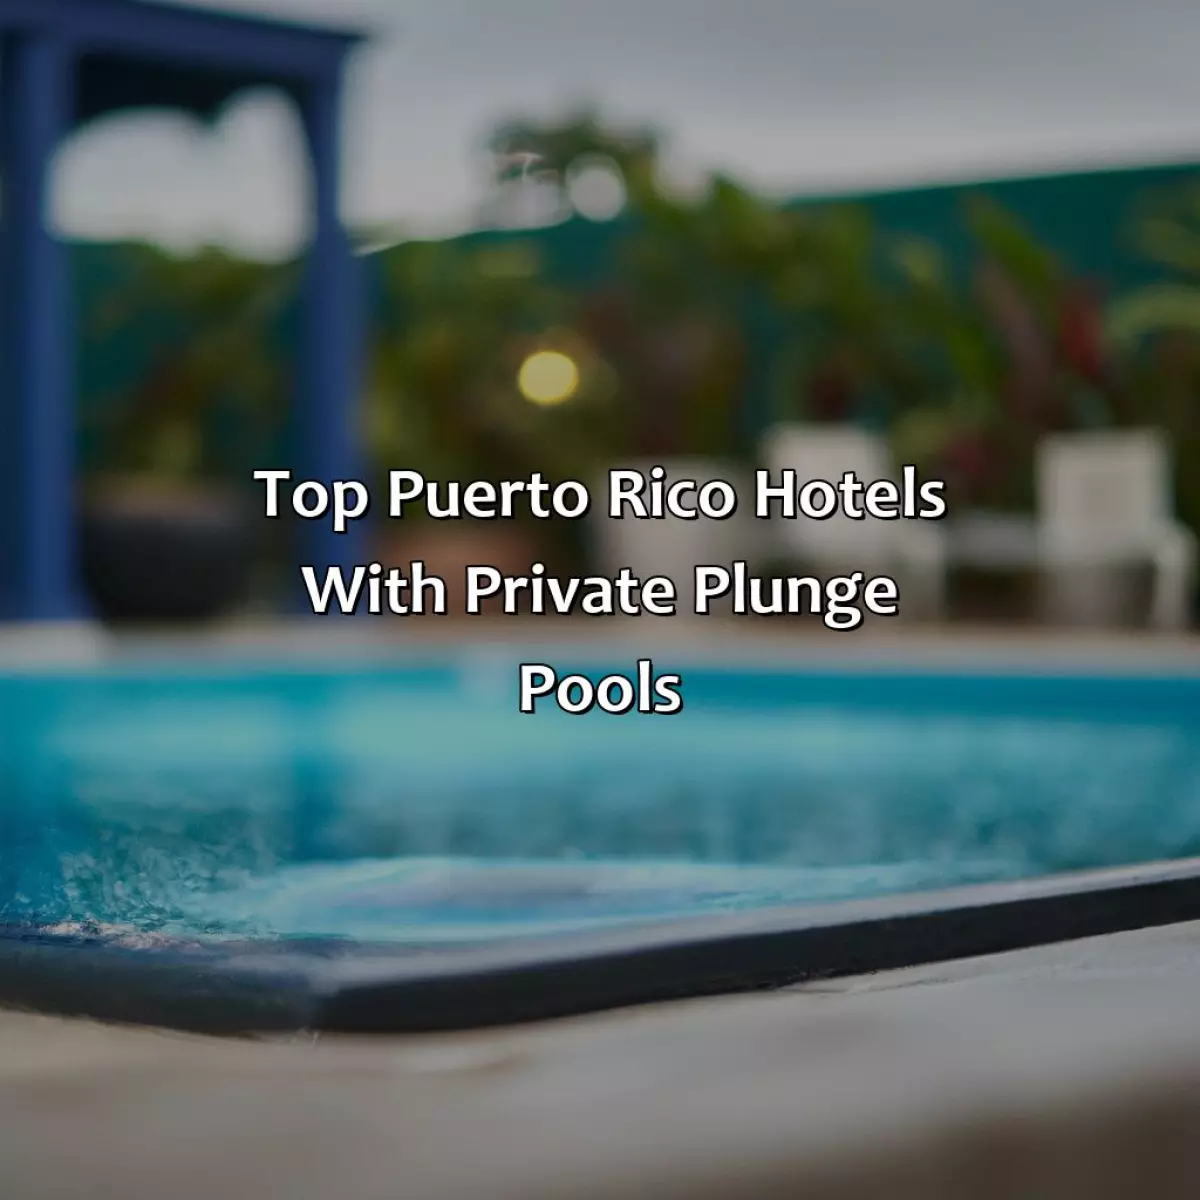 Top Puerto Rico Hotels with Private Plunge Pools